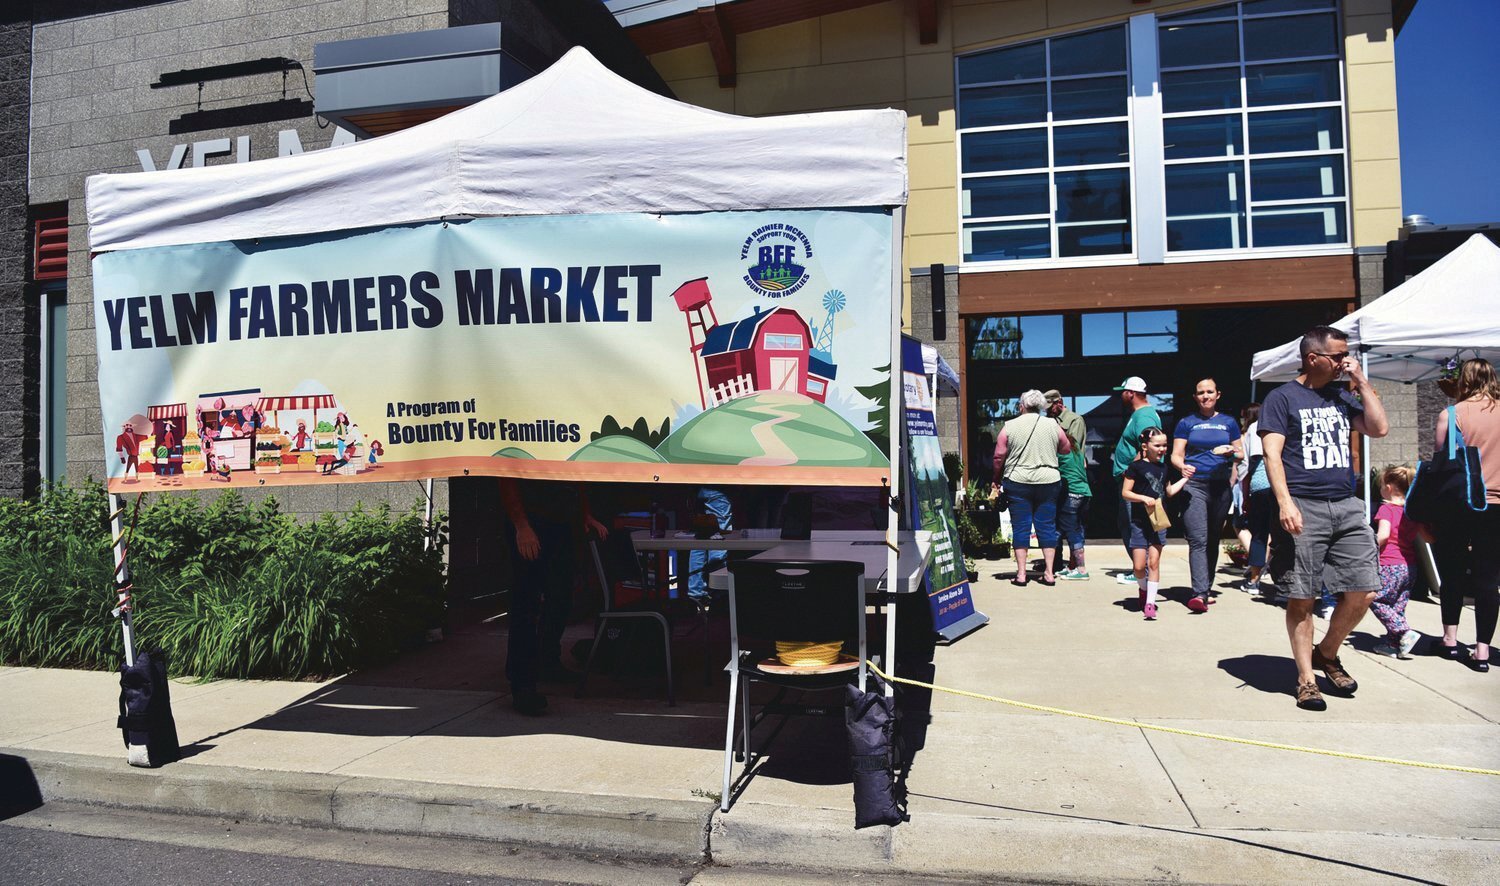 The Yelm Farmers Market will continue its summer series on Saturday, Sept. 24 at Yelm Community Park.